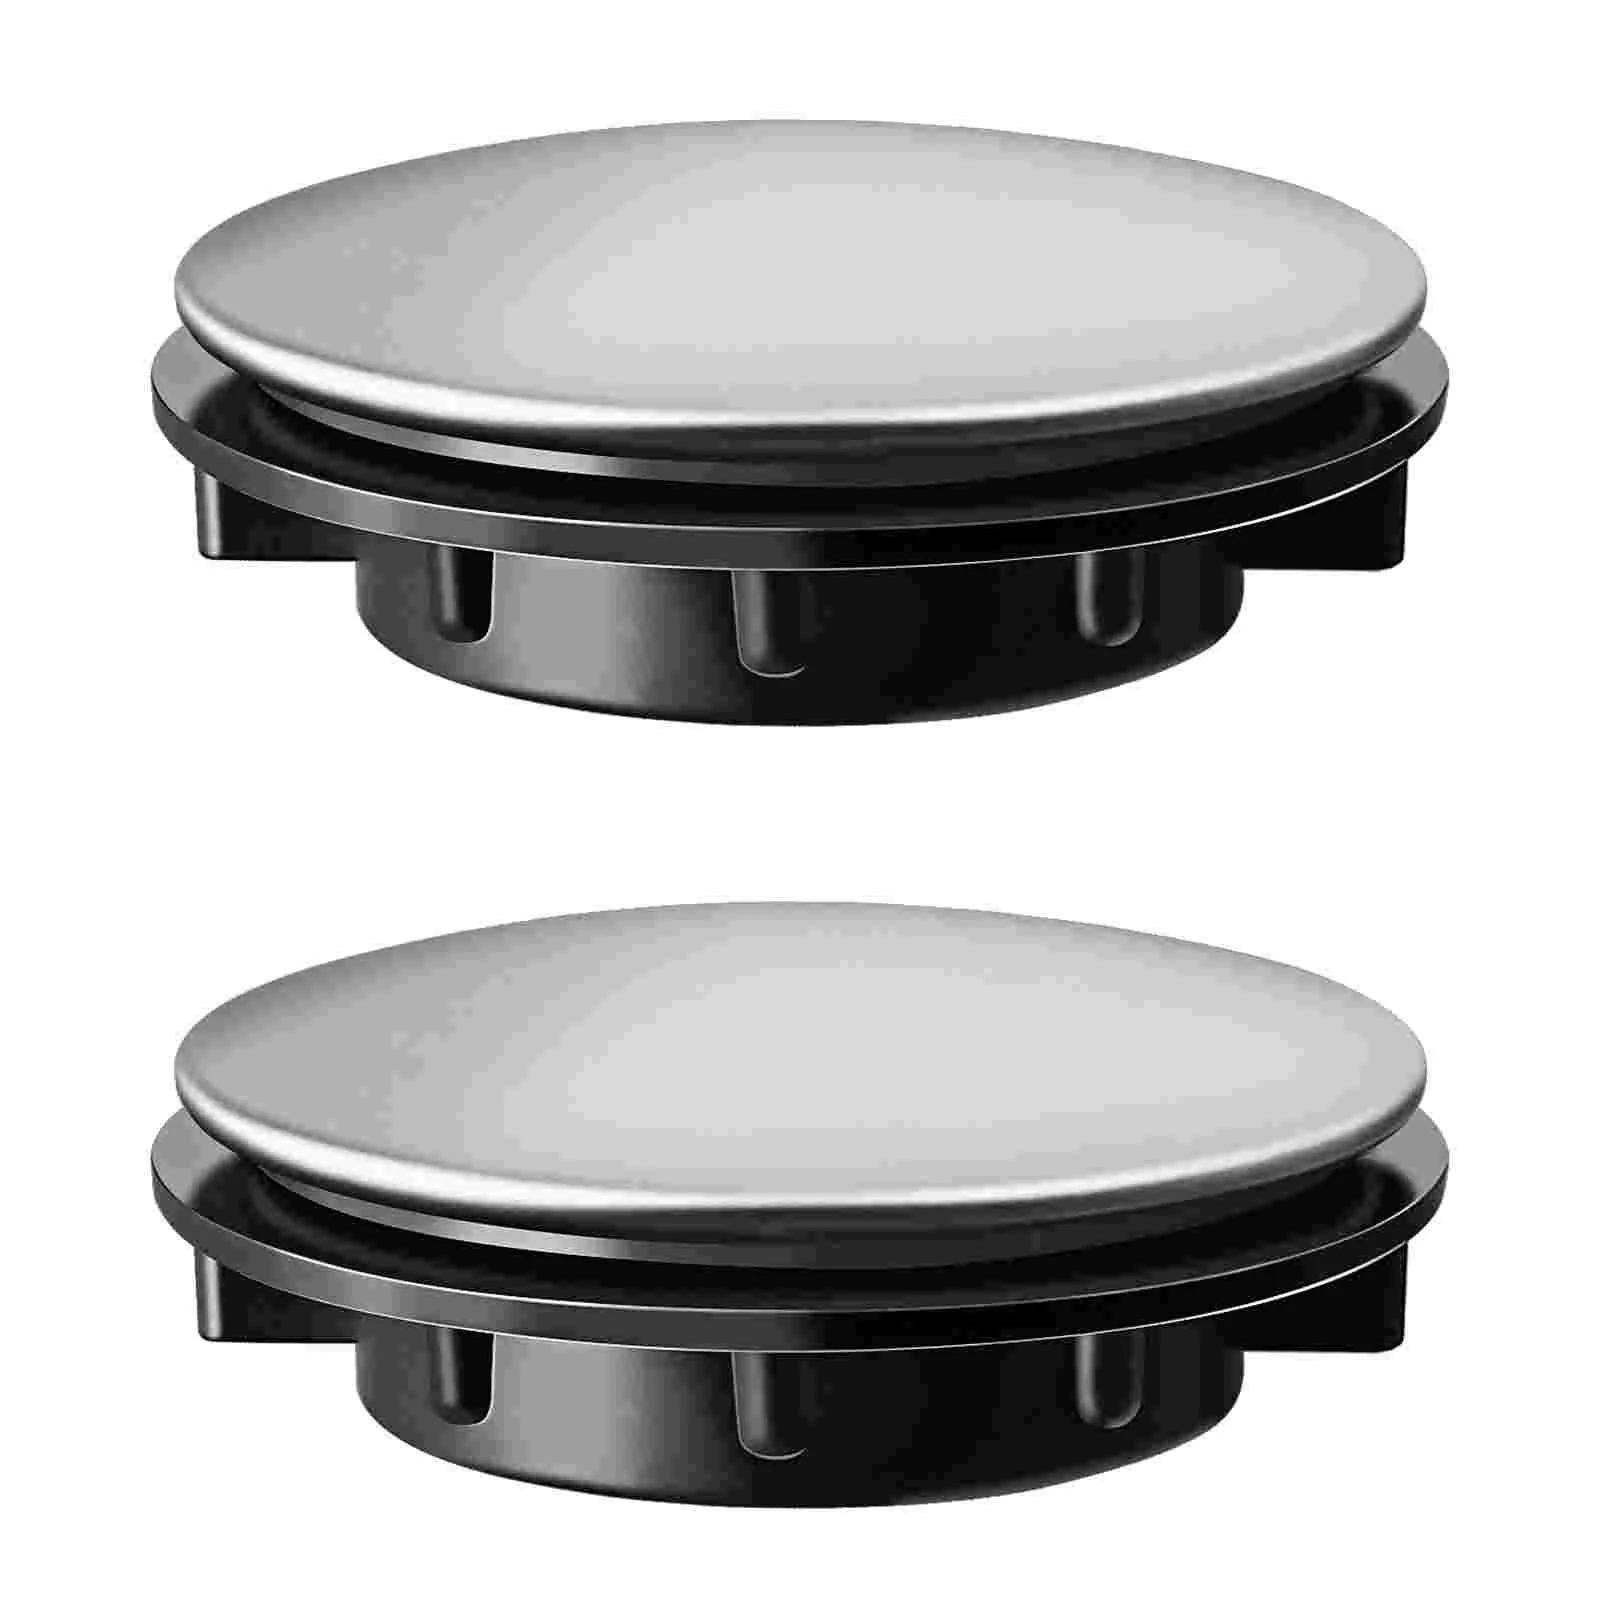 

2 Pcs Sink Hole Cover Faucet Plug Tap Wash Basin Kitchen Stainless Steel Accessories Washbasin Drain